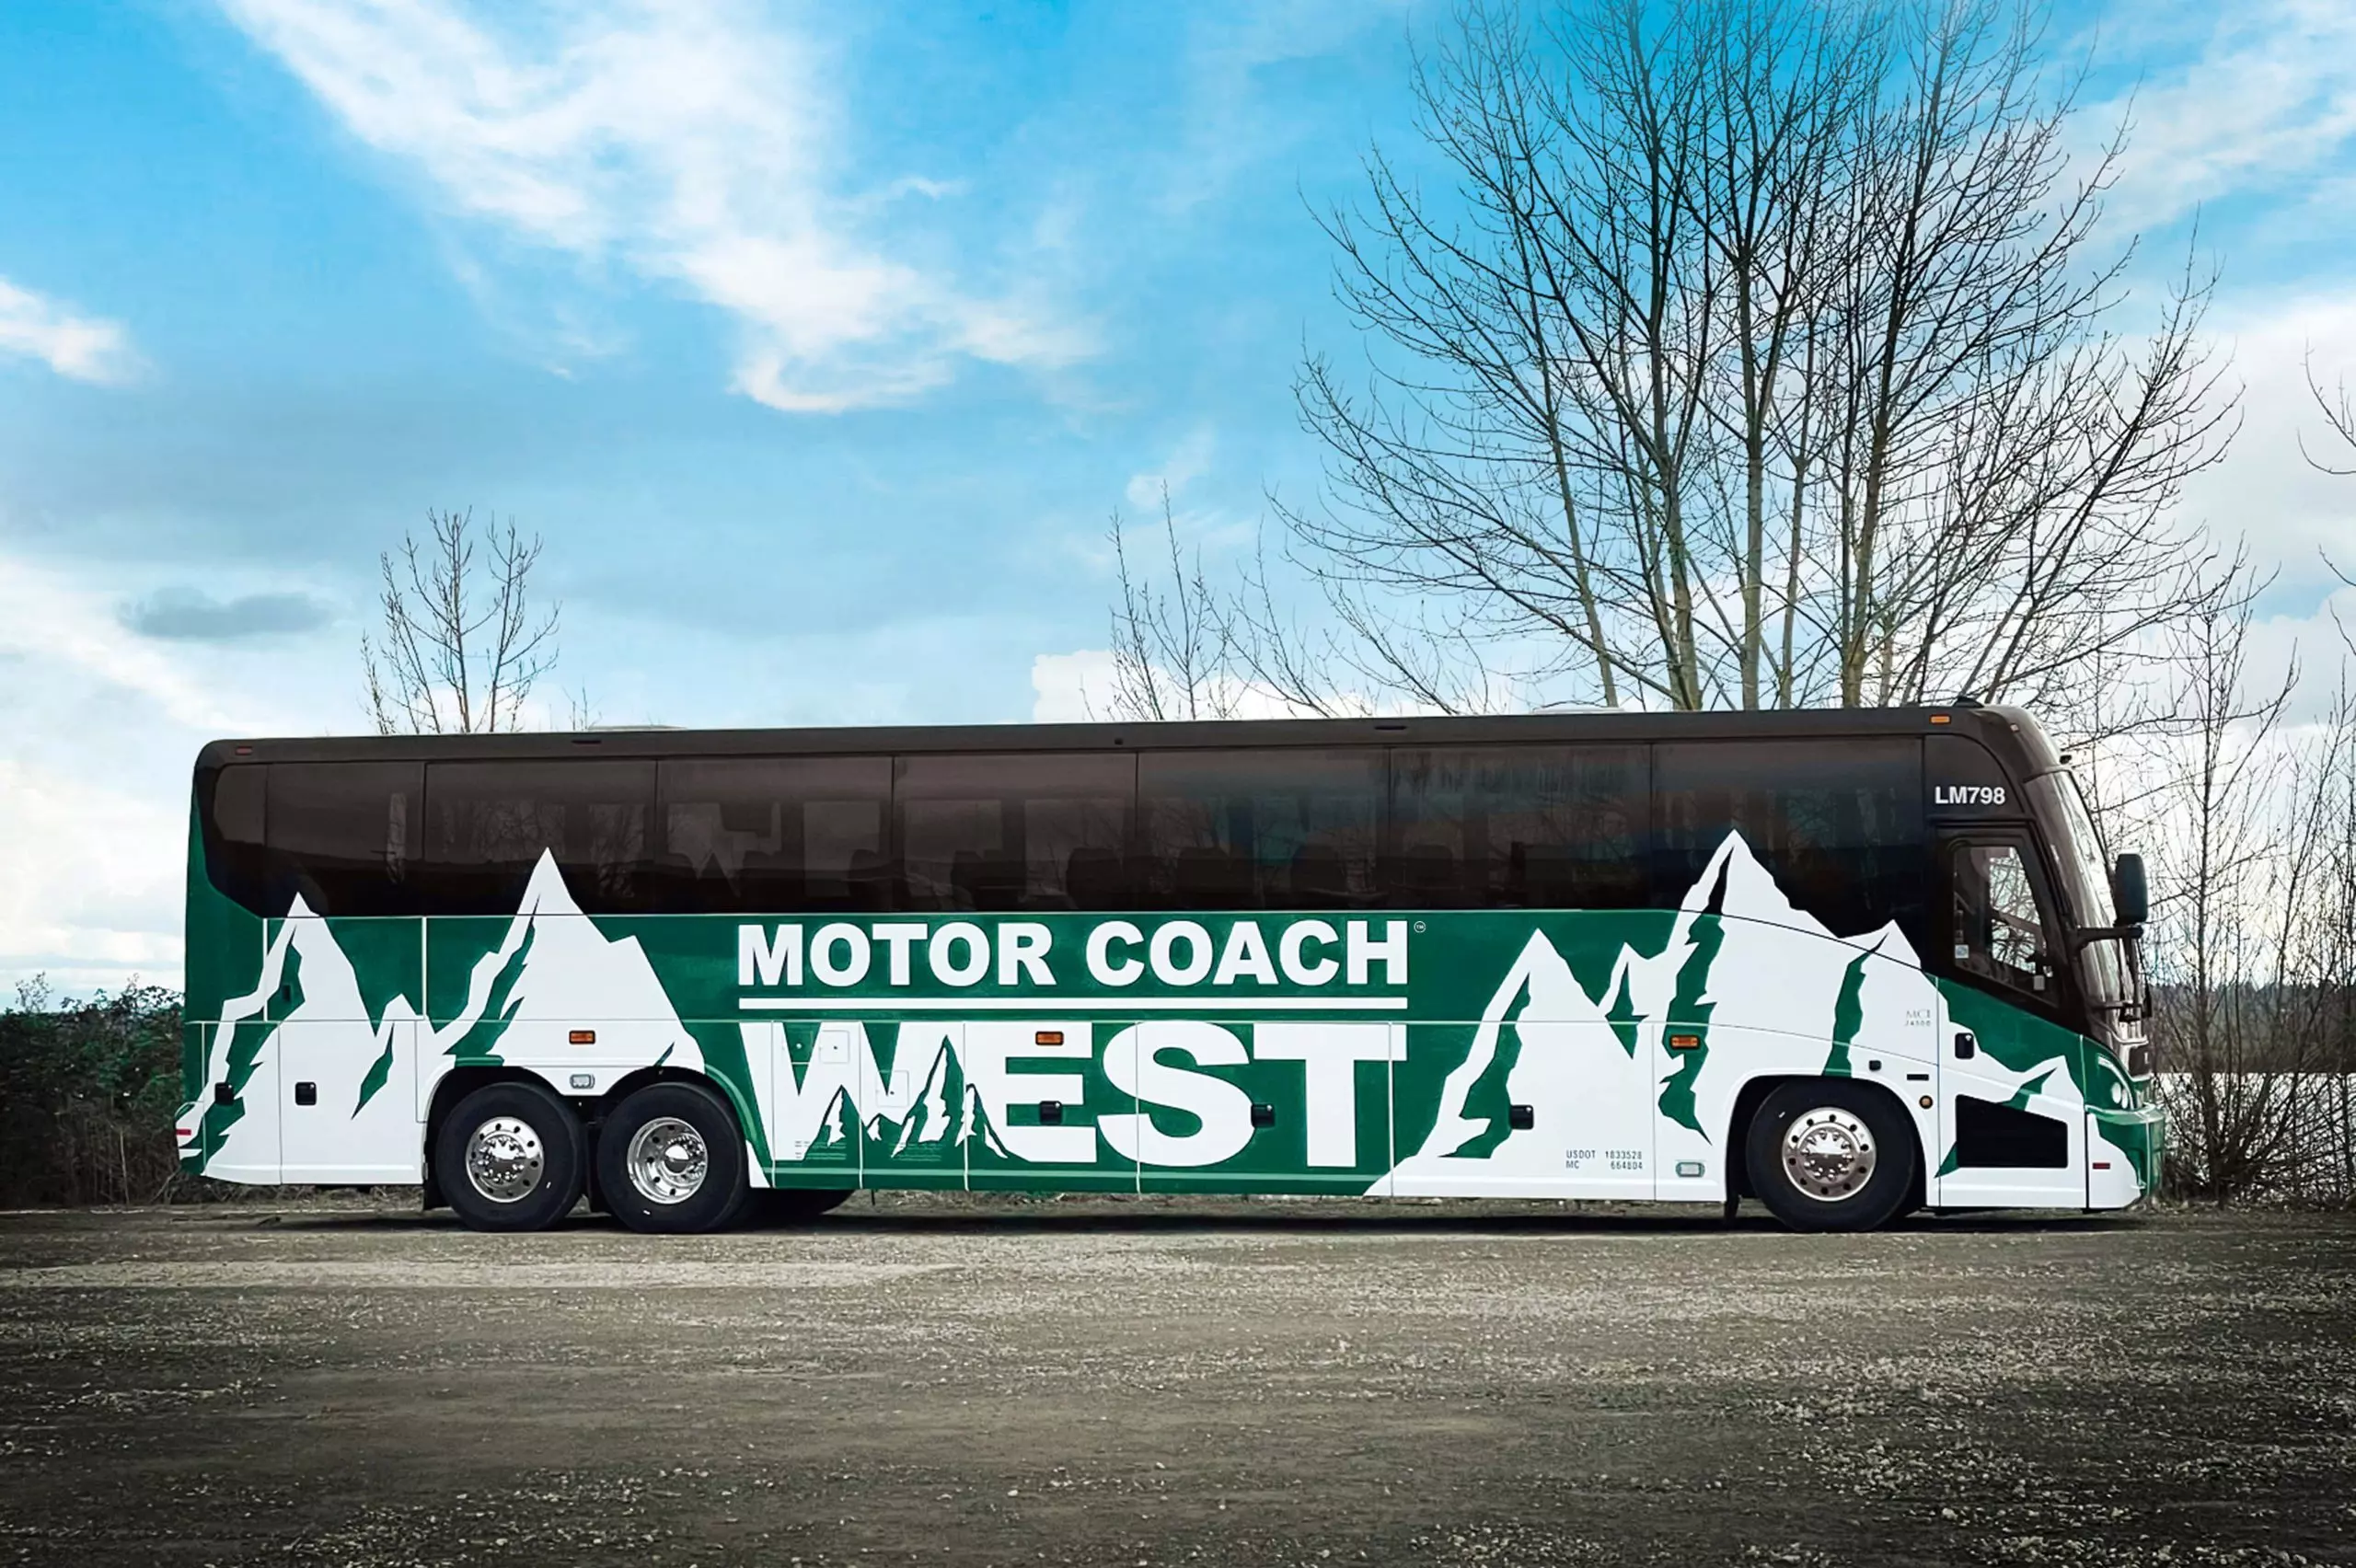 Green Motor Coach West bus against partly cloudy sky background